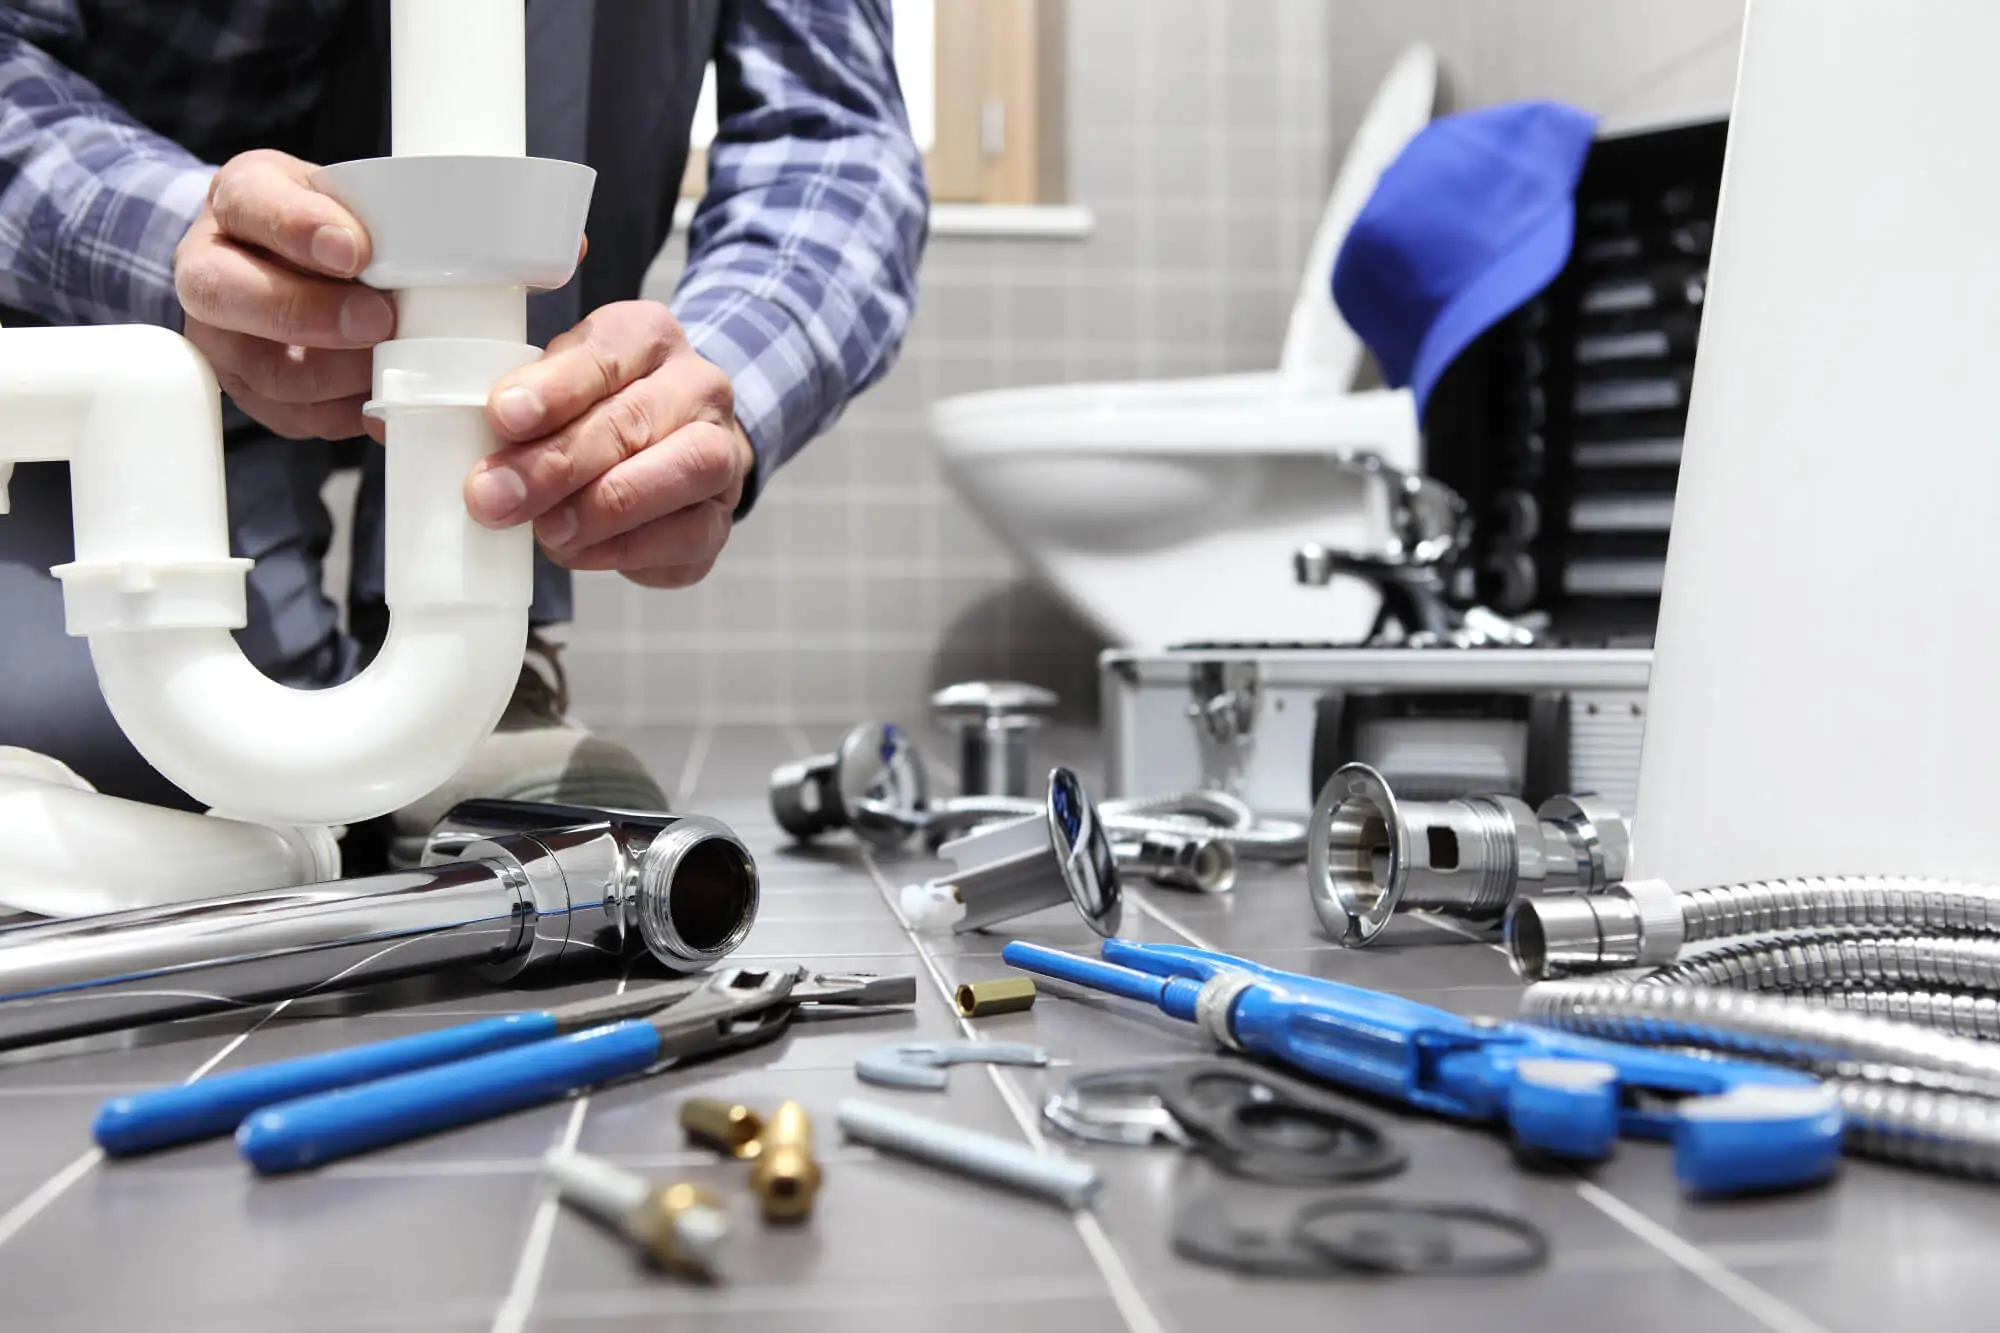 Plumbing Repair Service Near Me: How To Choose the Right Plumber